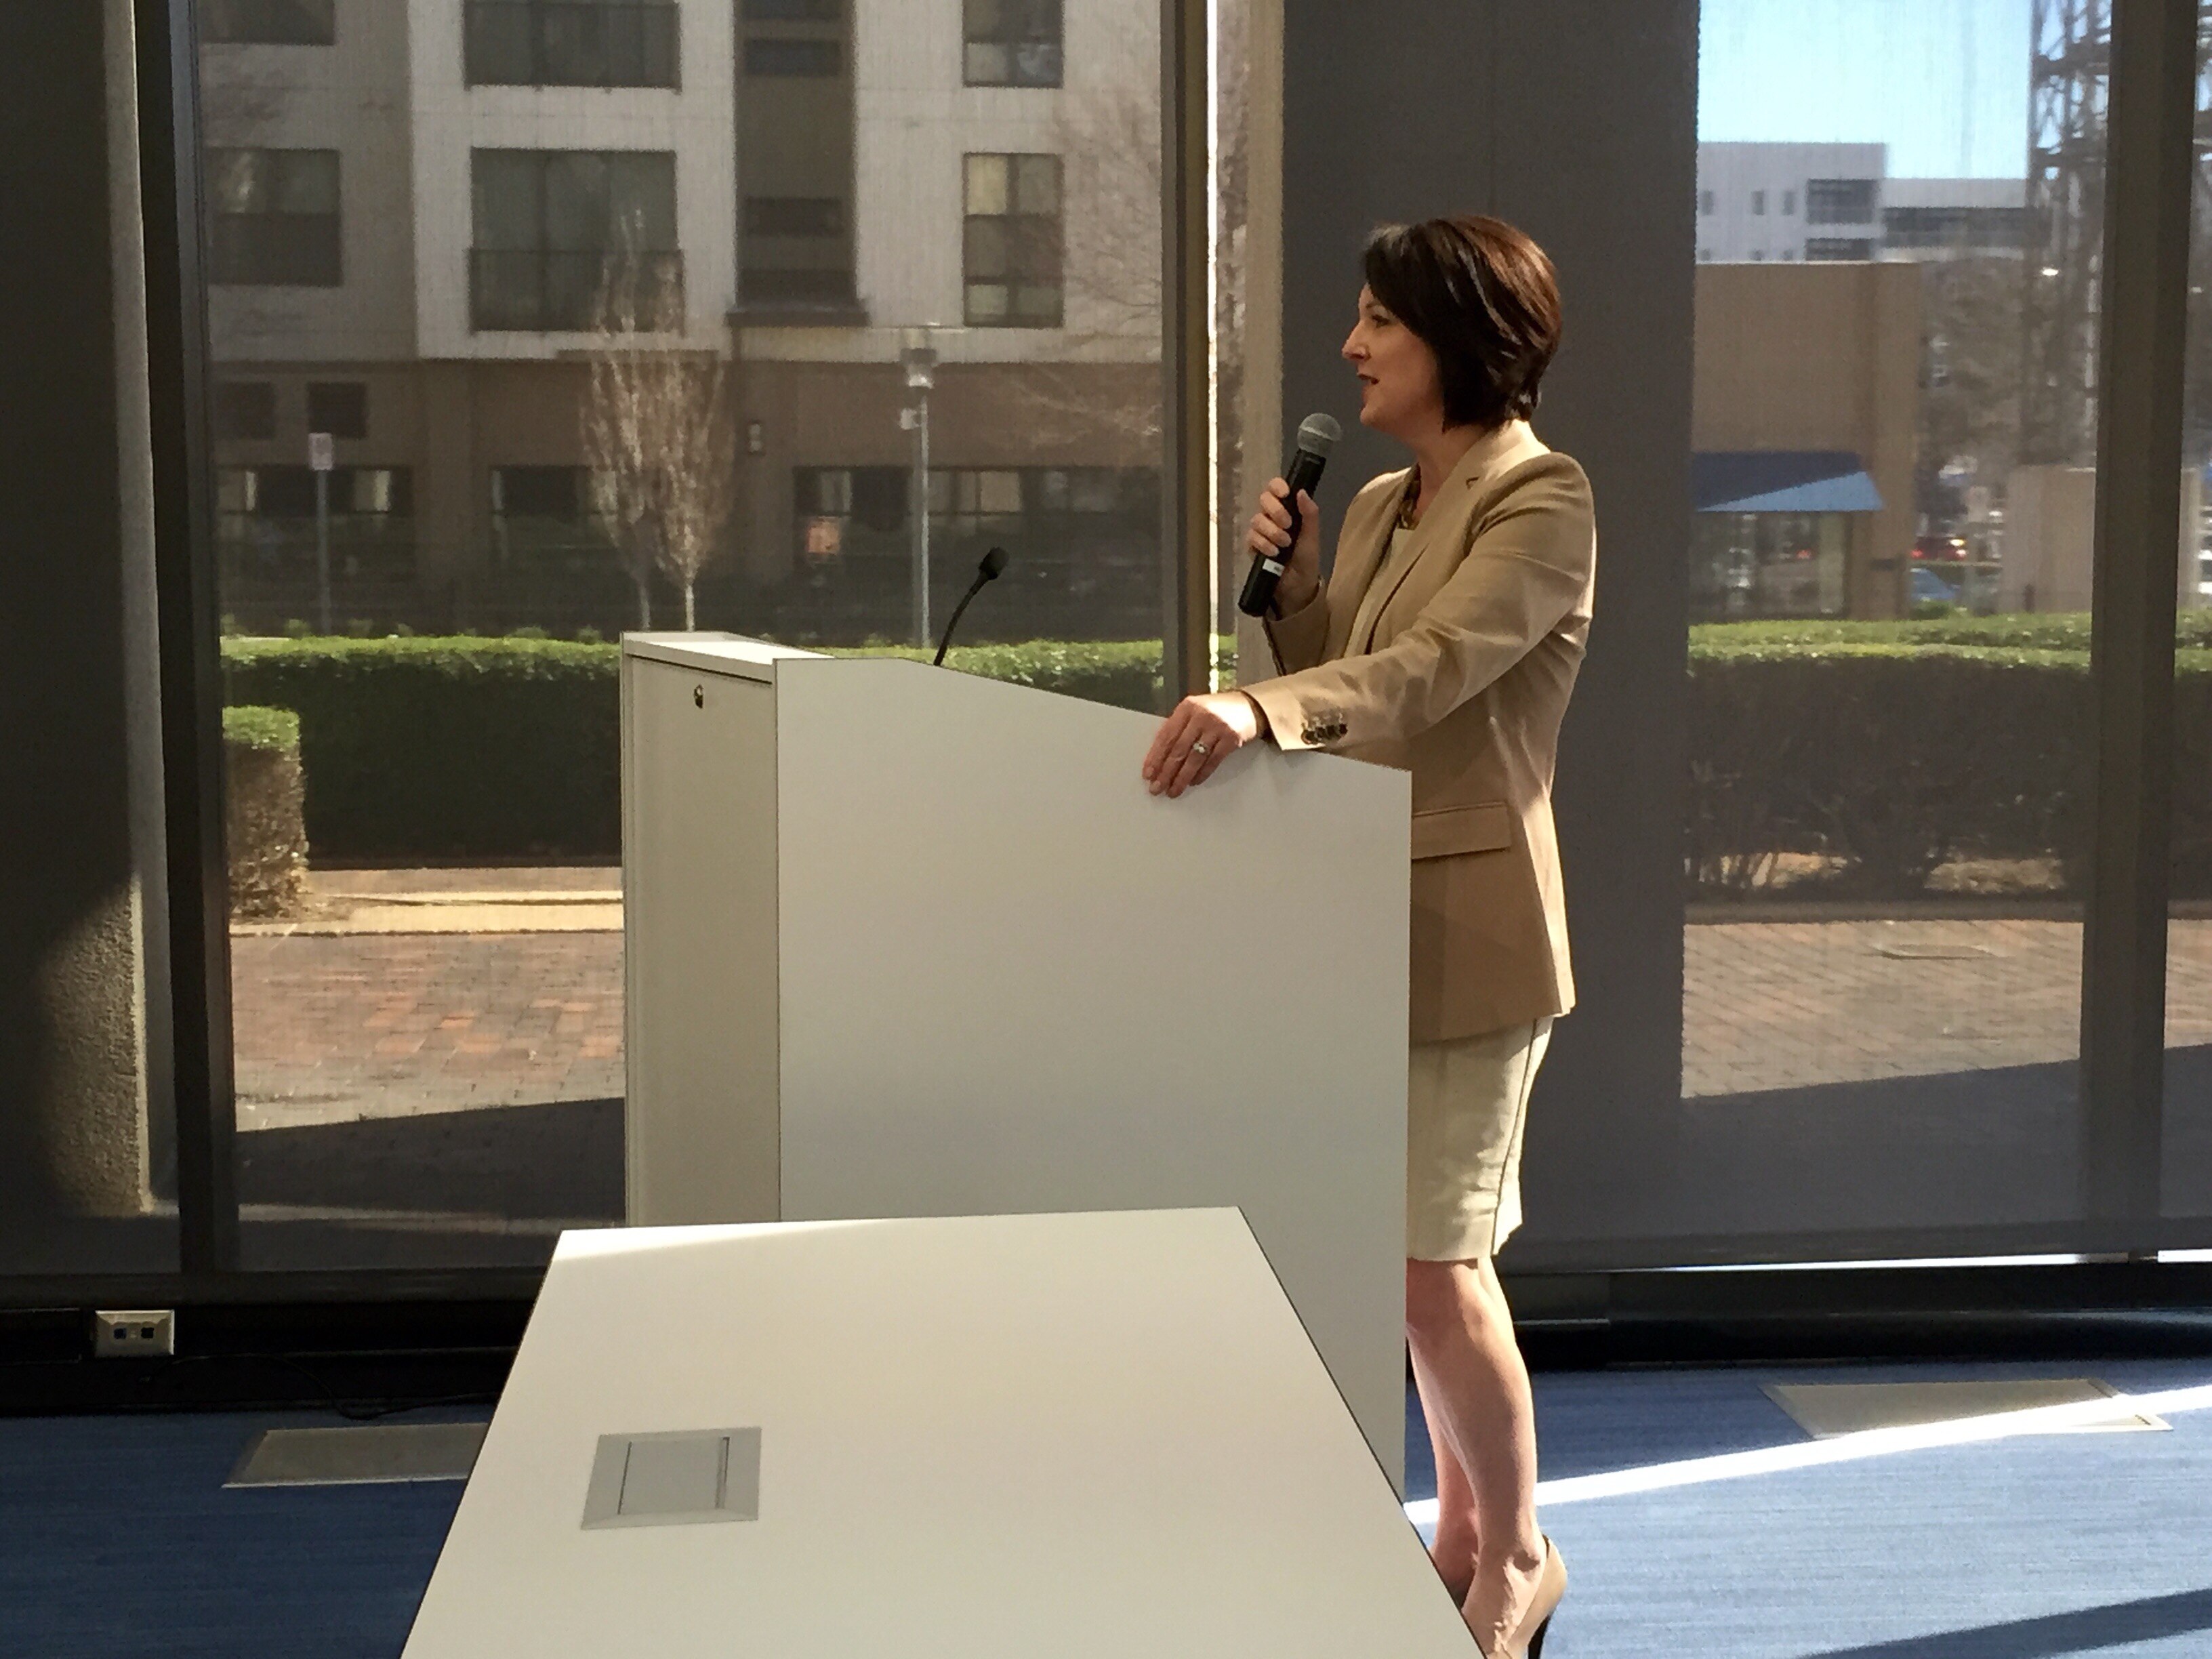 BBVA Compass Birmingham Market CEO Andrea Smith welcomes the contestants to the Next Gen semi-finals held at the bank's Development Center.